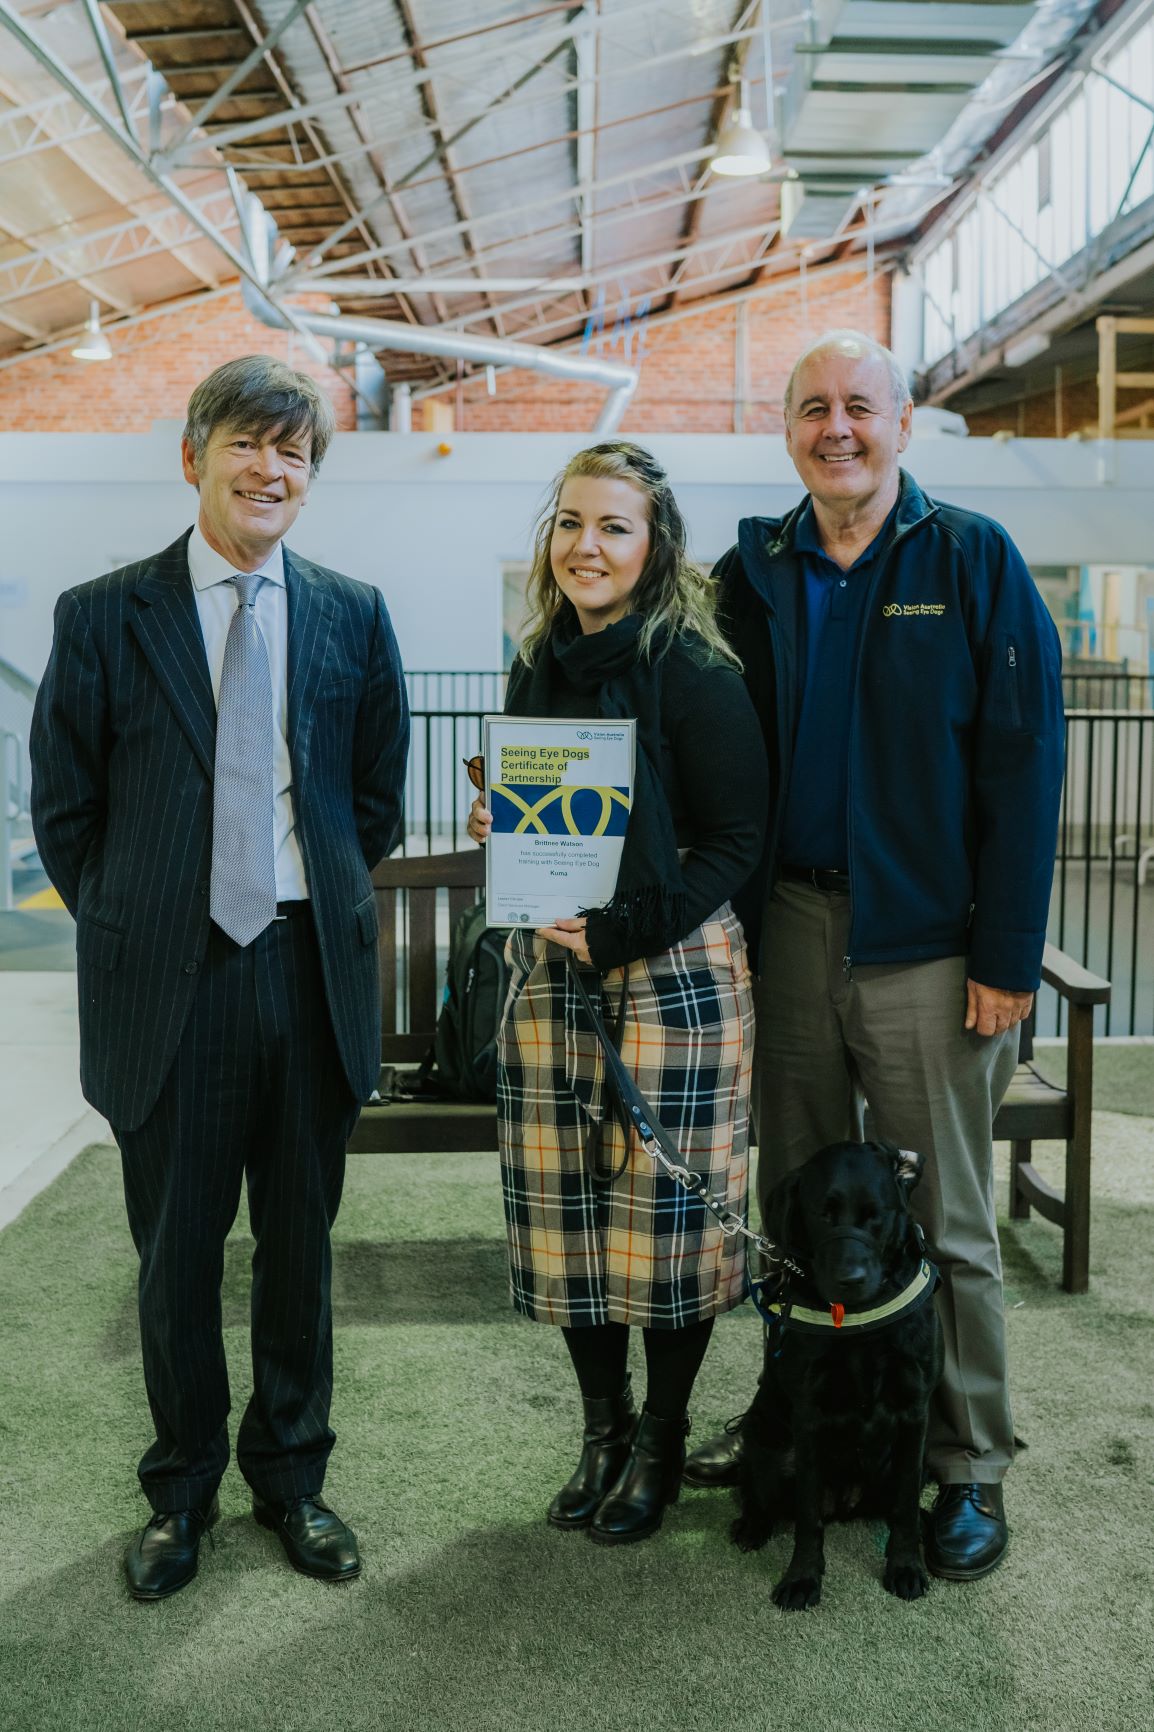 L TO R: The Hon. Luke Donnellan, Minister for Child Protection, Disability, Ageing and Carers, Seeing Eye Dogs client Britnee holding her certificate, Vision Australia CEO Ron Hooton, SED Kuma